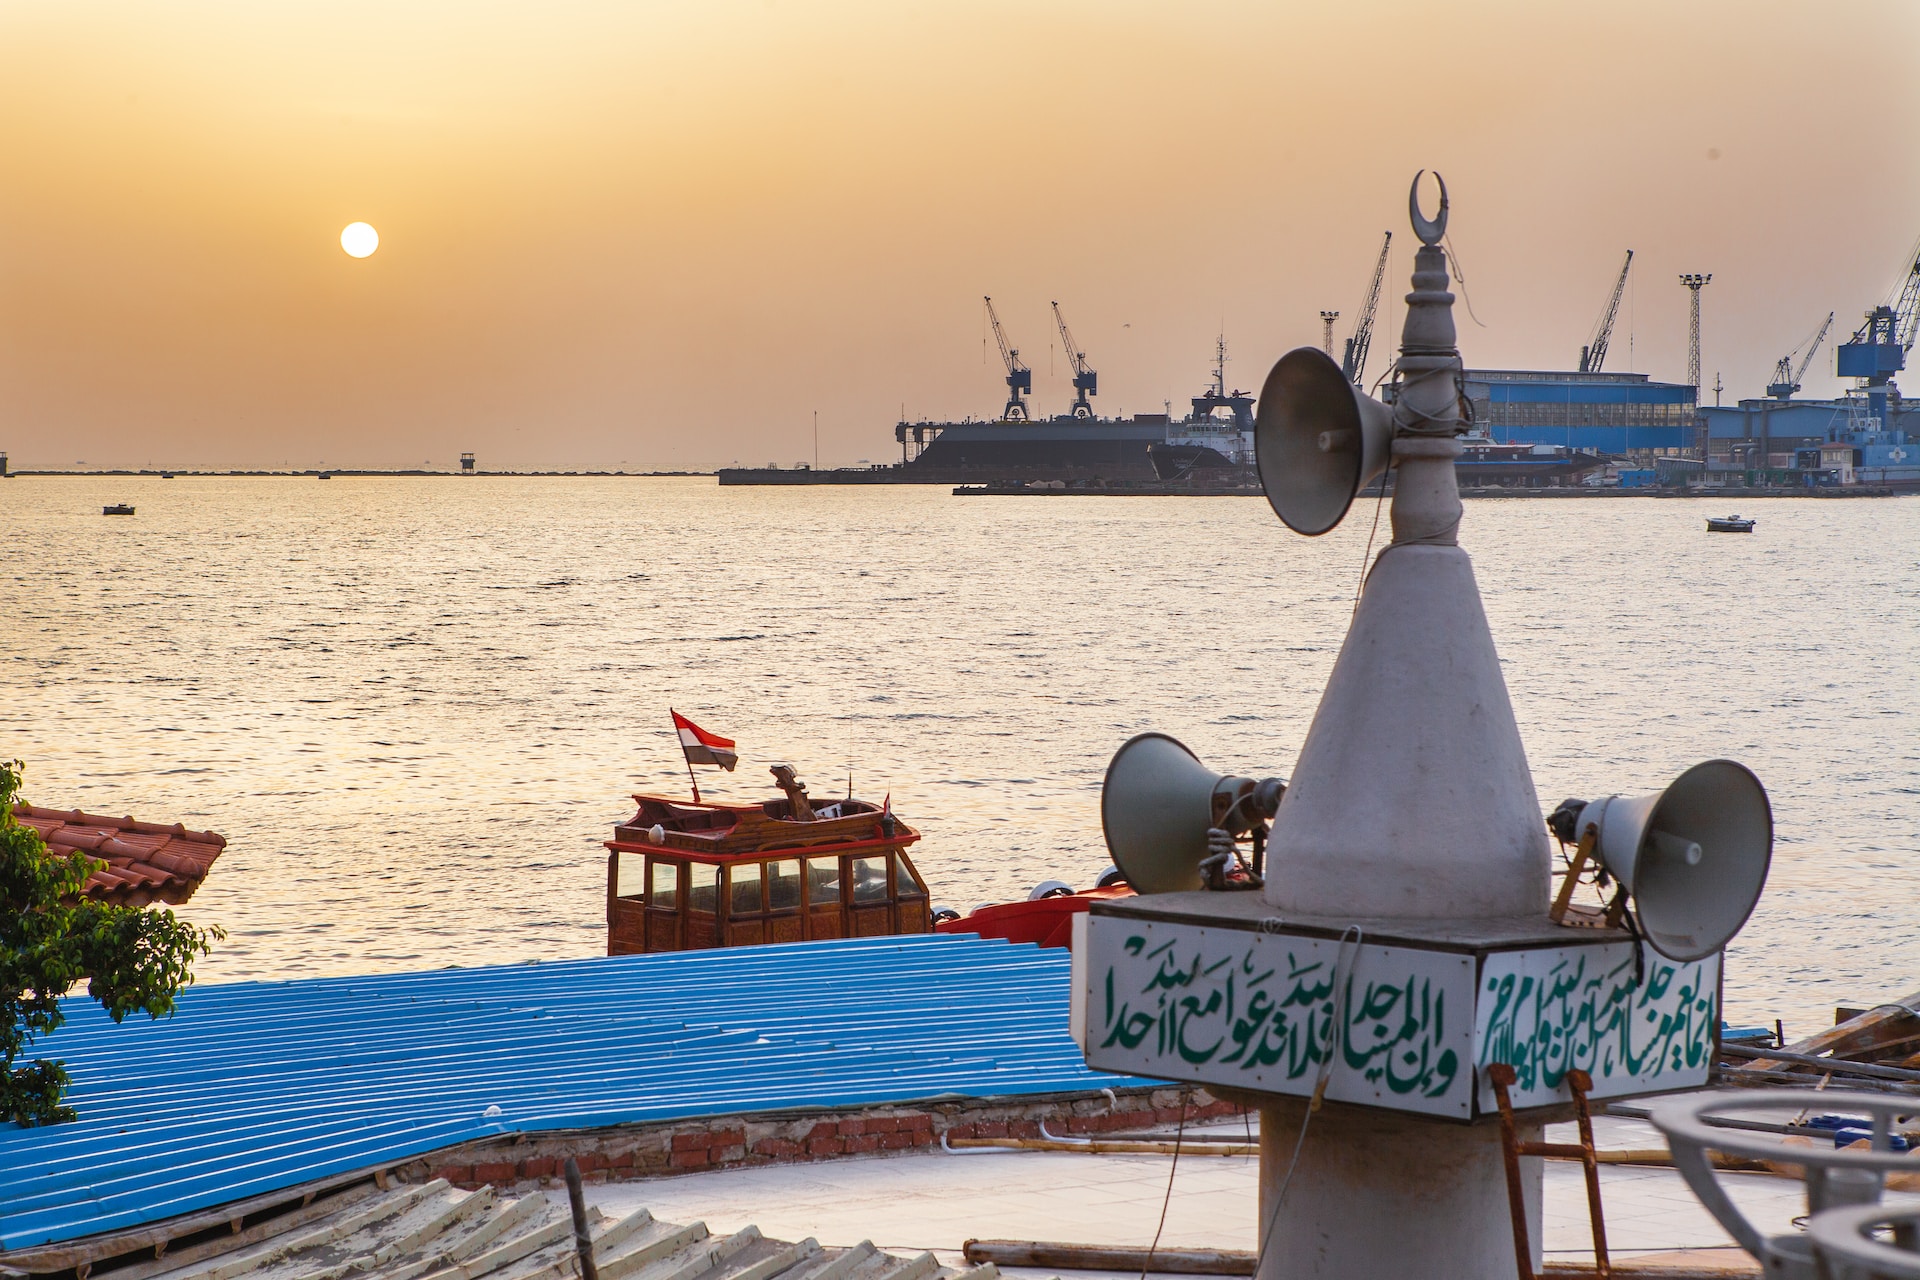 Three Major Companies Plan to Bunker LNG in Egypt